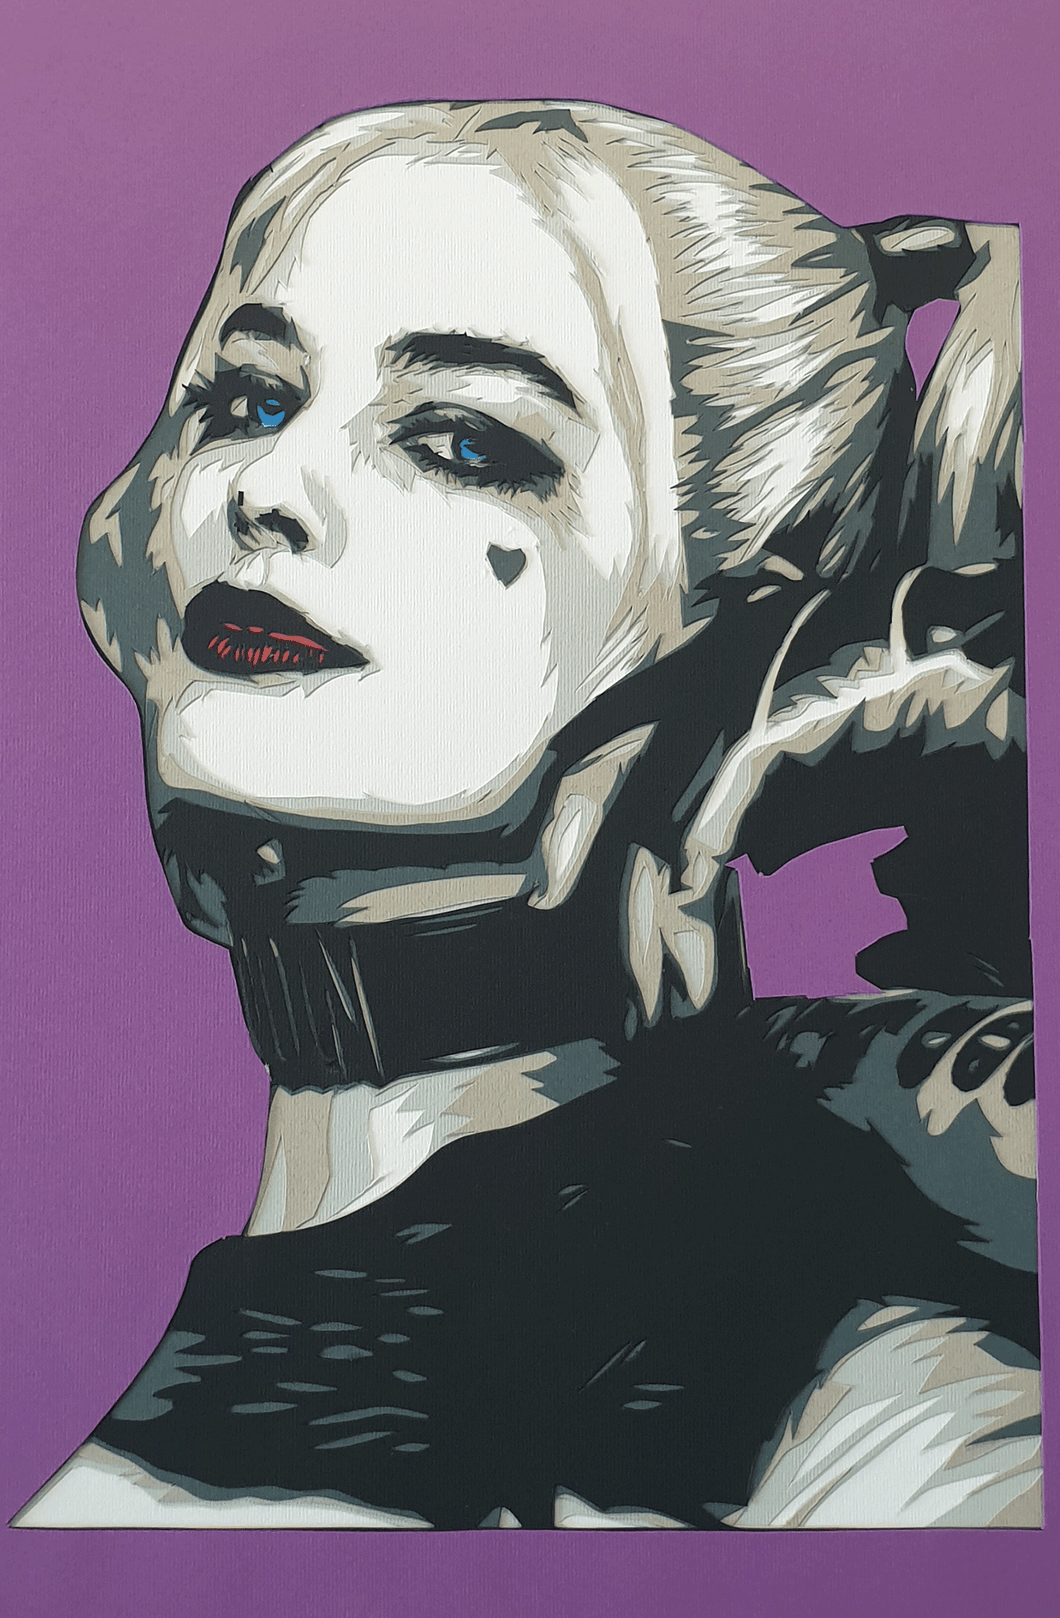 Harley Quinn by Rick Sharif - FRAMED [A3 Size (297 x 420 mm) (11.7 x 16.5 in) in a FRAME]